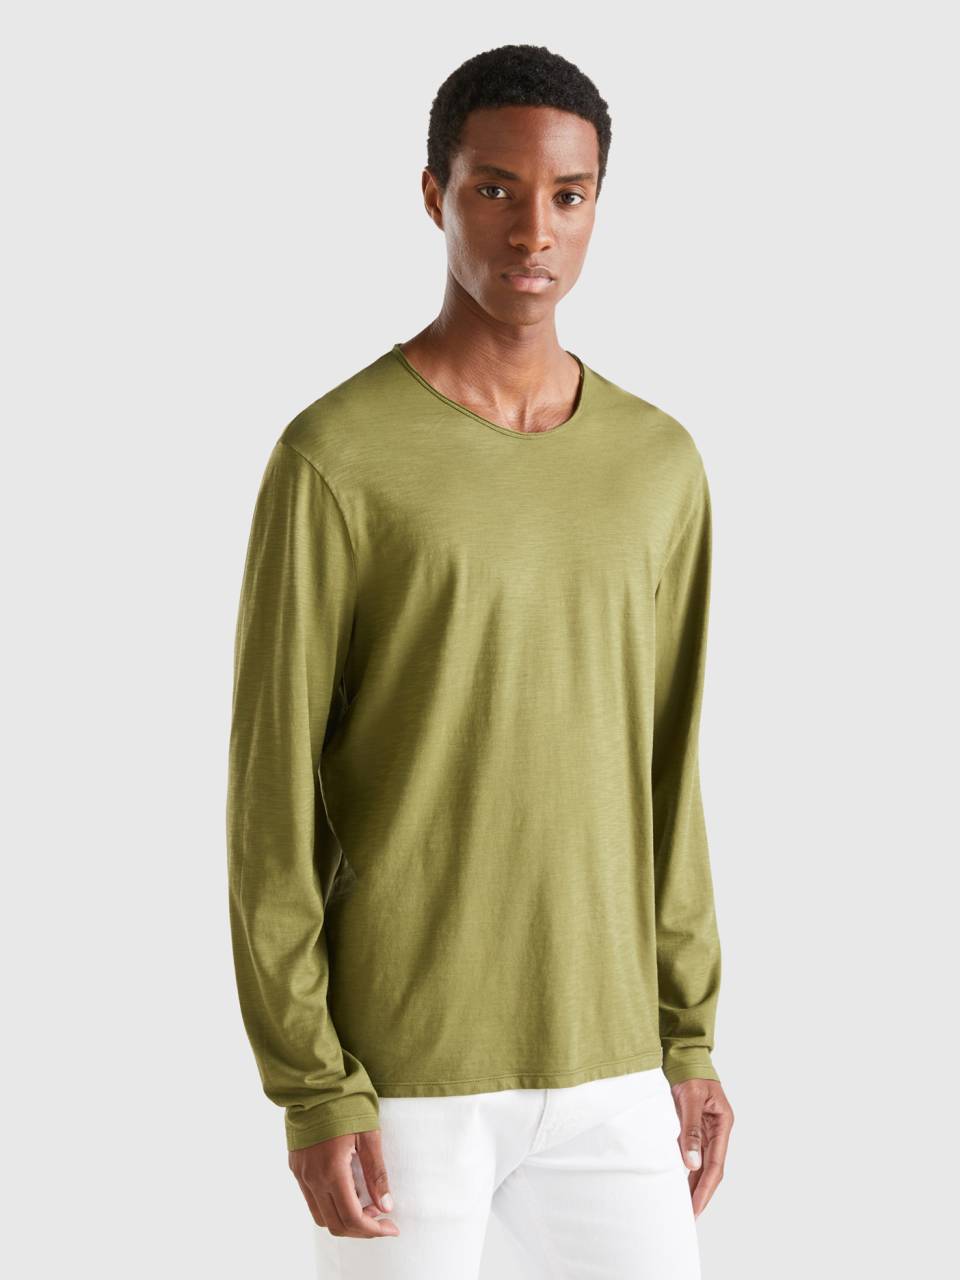 100% cotton Long in Green sleeve - | Military t-shirt Benetton